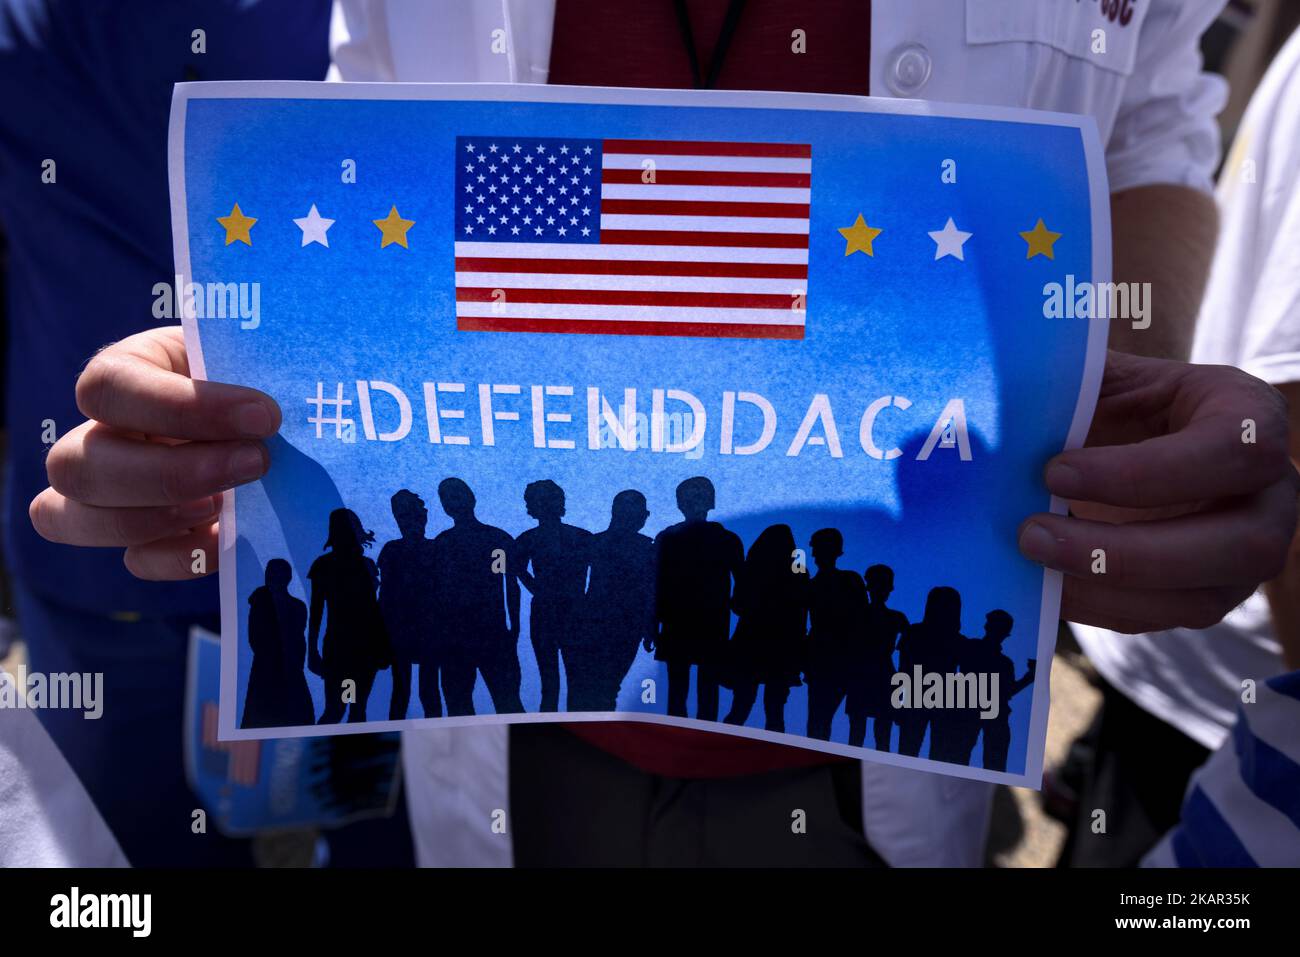 Immigration rights activists protest the Trump administration’s termination of the DACA programin Los Angeles, California on September 5, 2017. The Deferred Action for Childhood Arrivals program protected 800,000 young undocumented immigrants from deportation. (Photo by Ronen Tivony/NurPhoto) Stock Photo